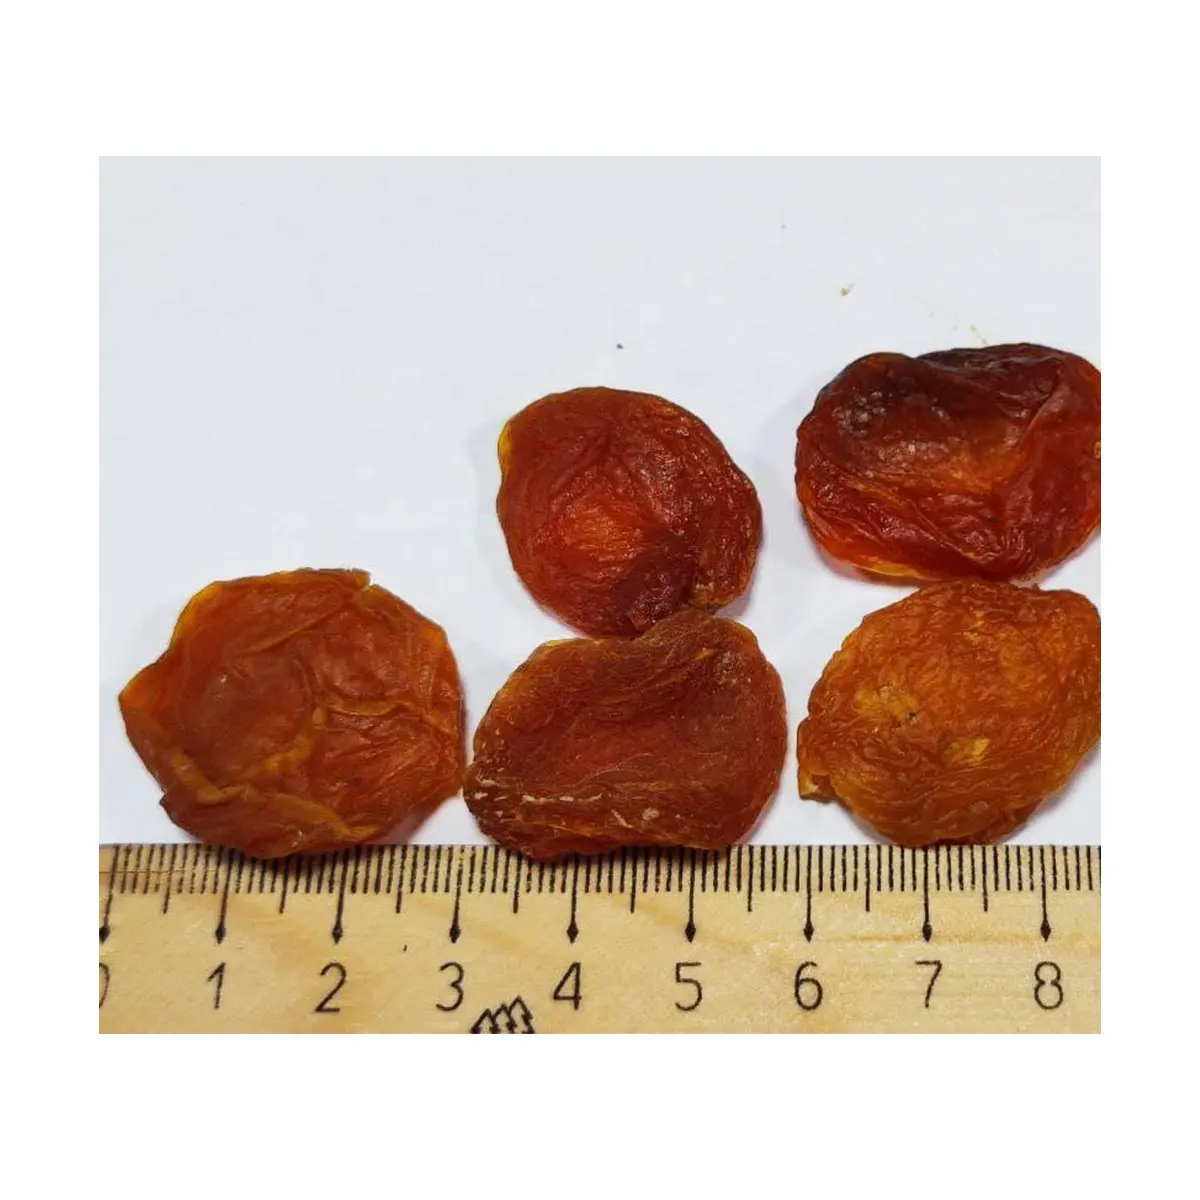 High grade non-GMO non calibrated 5-10 kg dried fruits from Uzbekistan INDUSTRIAL grade dried apricots for Food